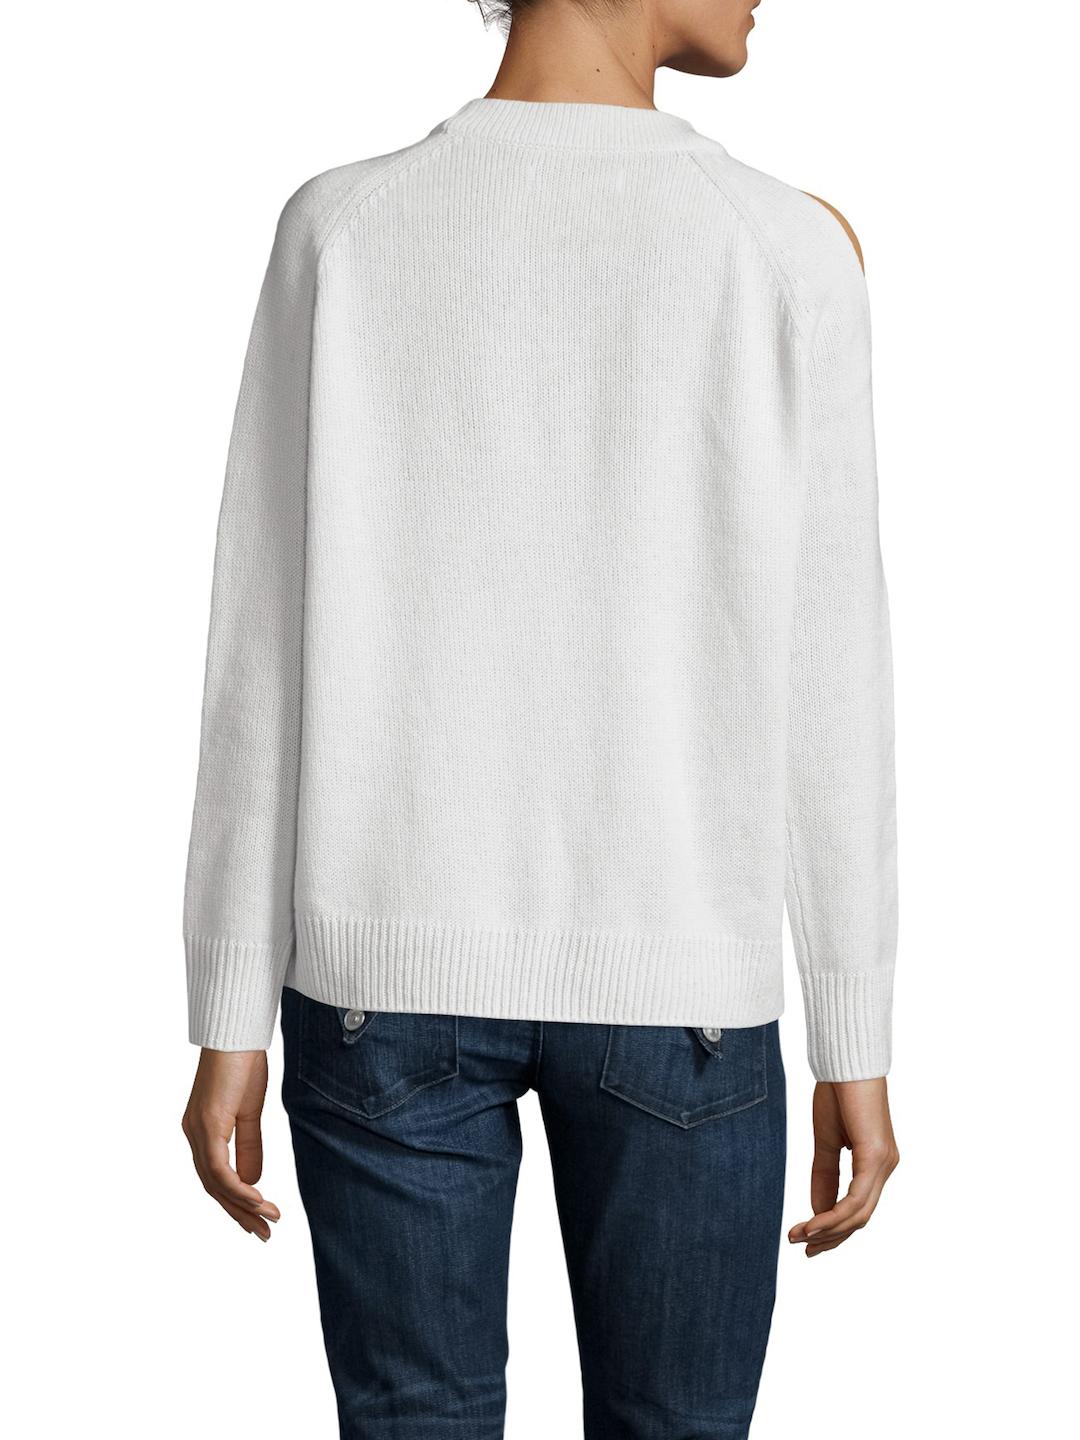 Wythe ny Cashmere Crewneck Sweater in White | Lyst